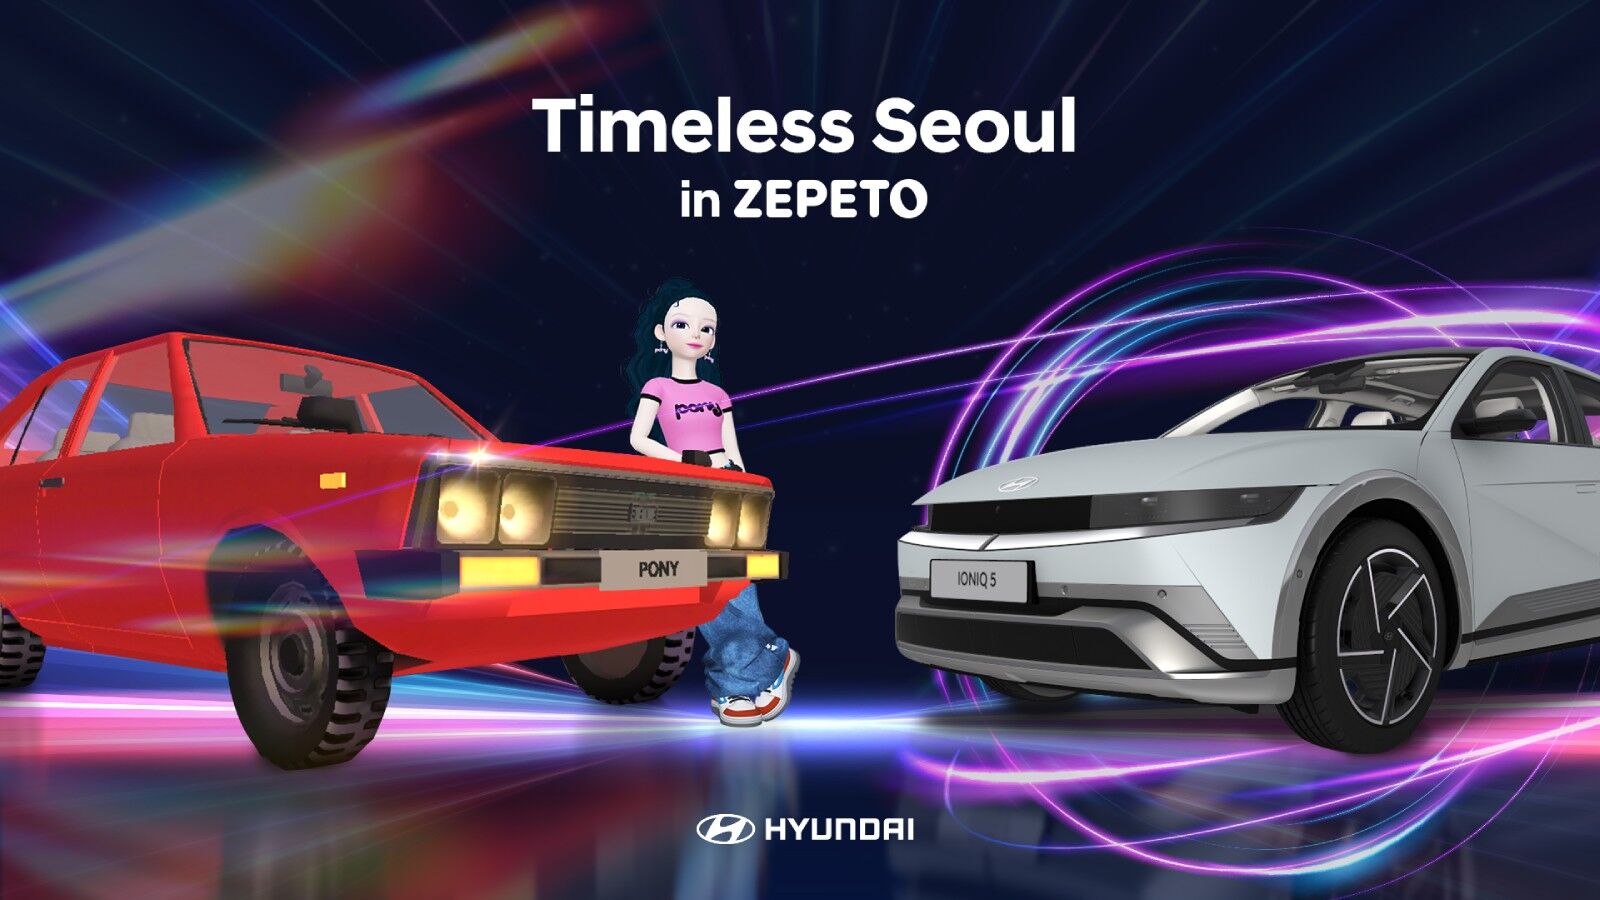 Pony and IONIQ 5 - Timeless Seoul in ZEPETO